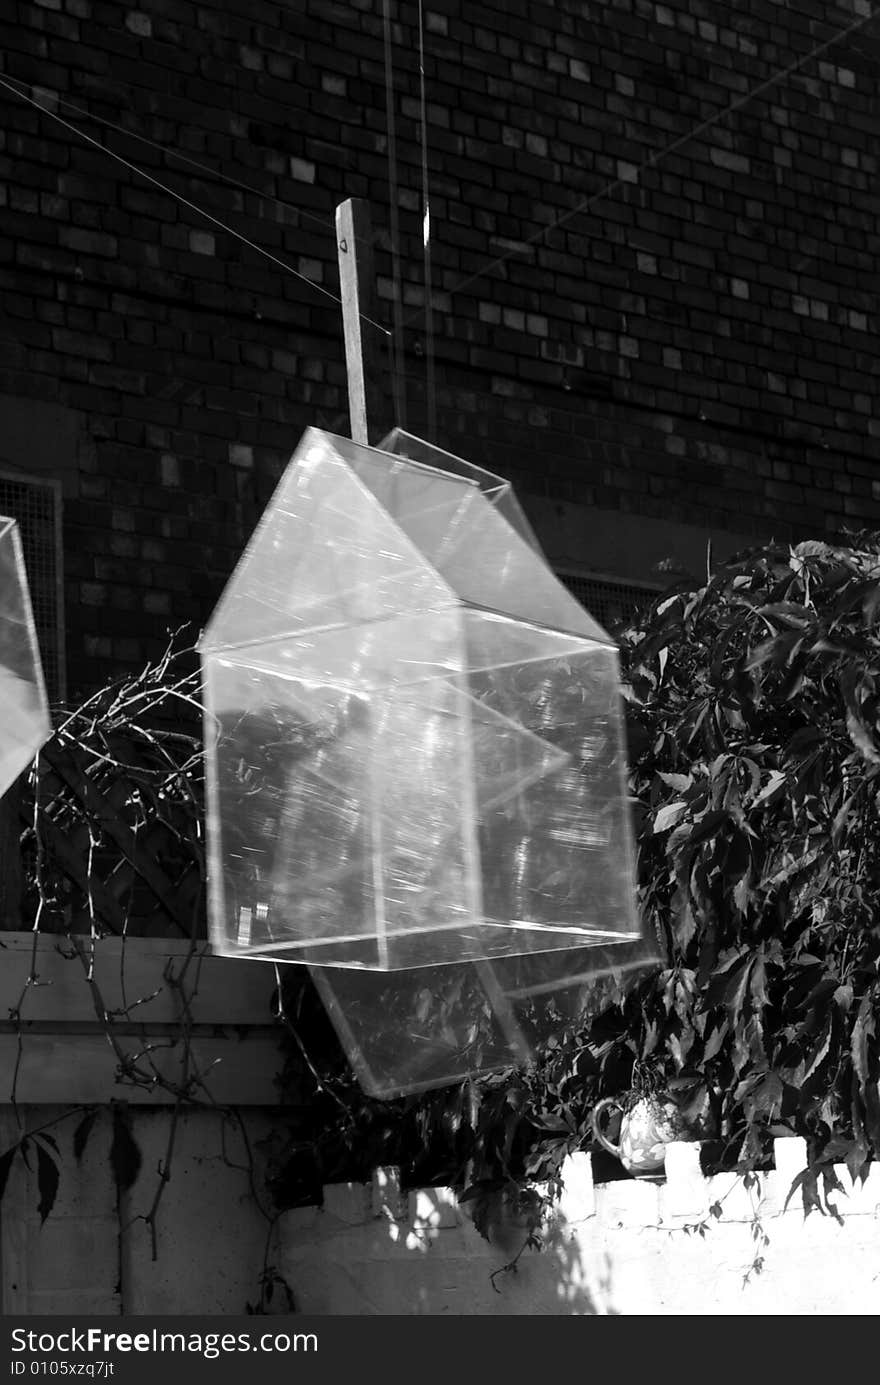 Installation art piece with floating perspex houses suspended on wire to look like polygonal soap bubbles, close up in black and white. Installation art piece with floating perspex houses suspended on wire to look like polygonal soap bubbles, close up in black and white